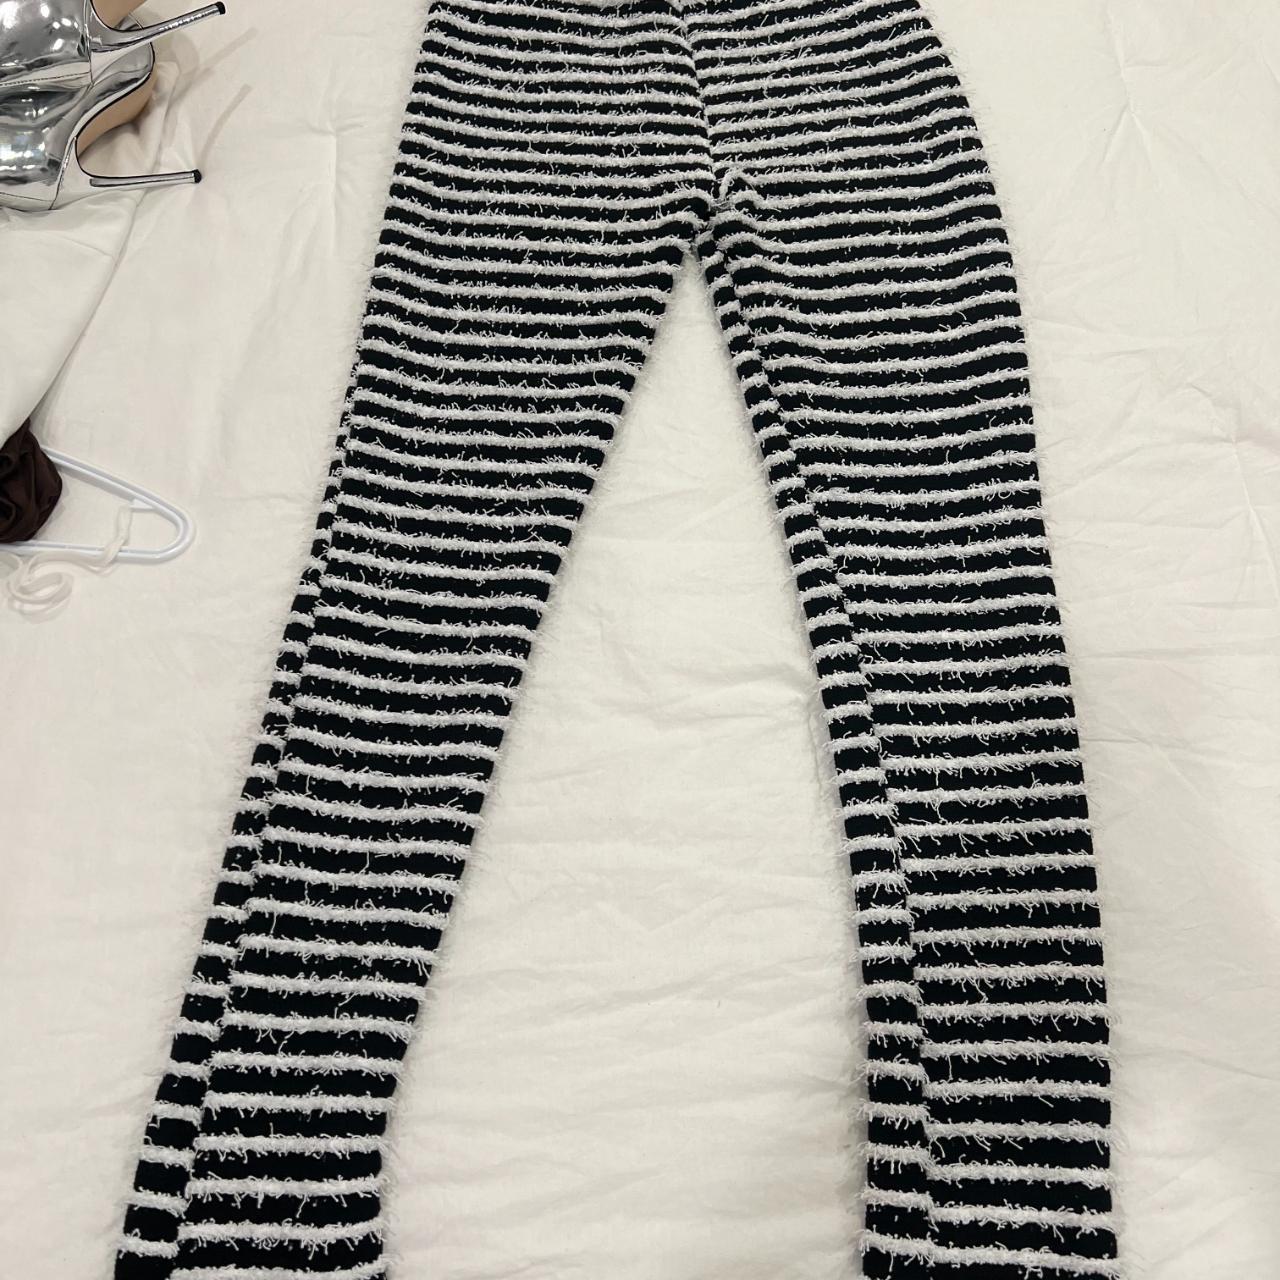 Fuzzy Black and White Pants - Depop